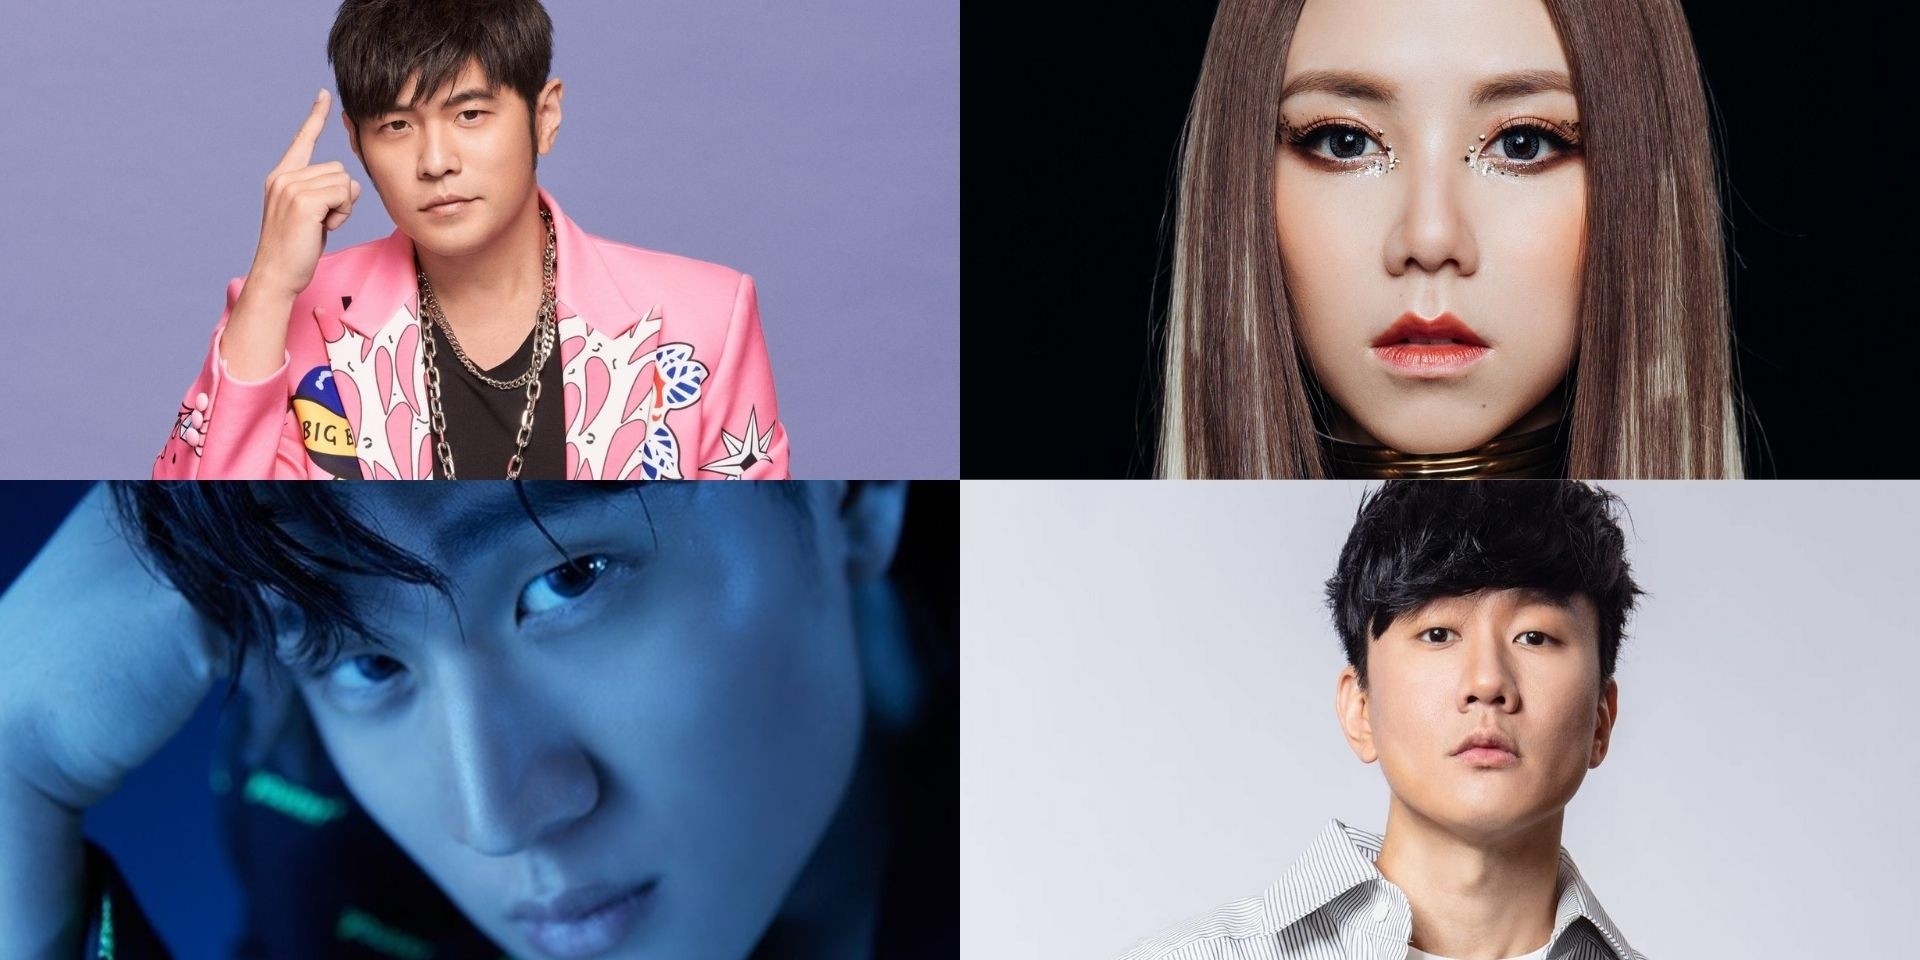 Jay Chou, G.E.M, JJ Lin, Eric Chou and more top Spotify 2020 Wrapped Taiwan’s list of most-streamed artists 